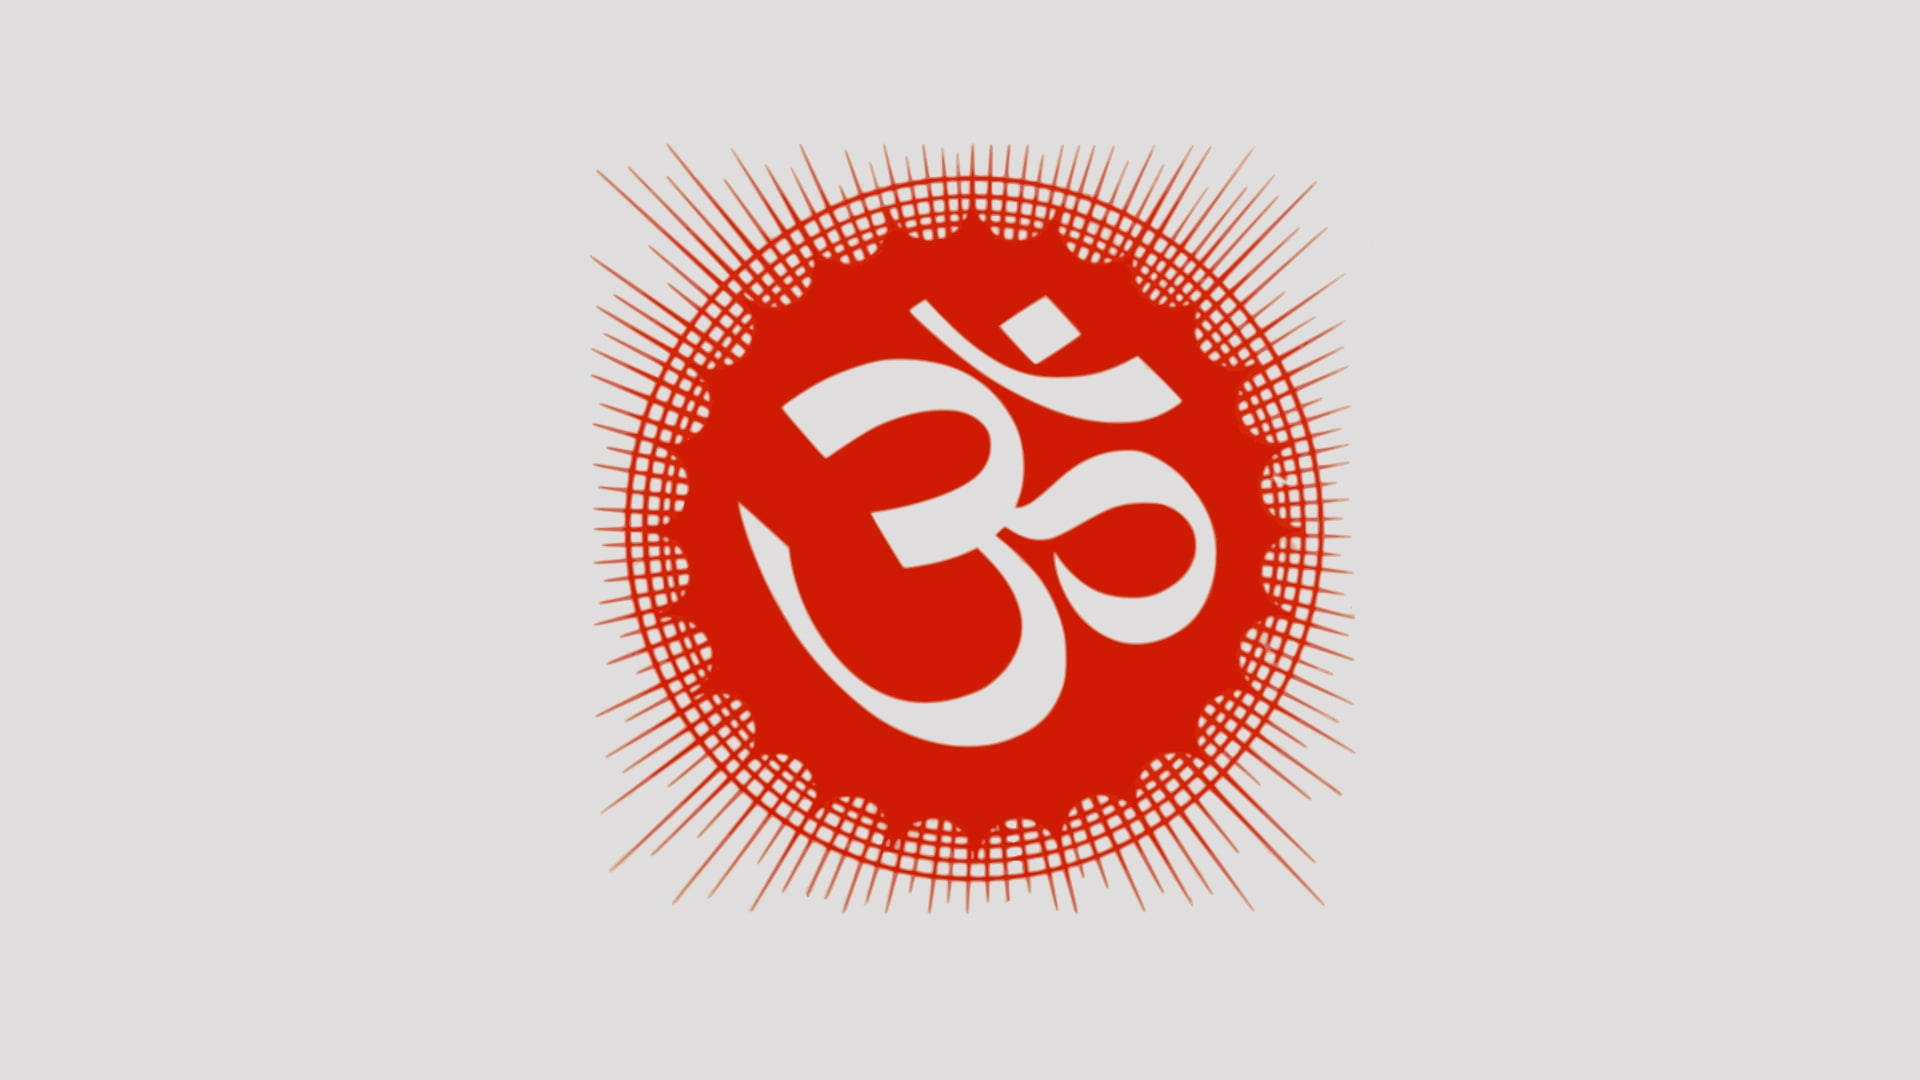 Free Om Wallpaper Downloads, [100+] Om Wallpapers for FREE 